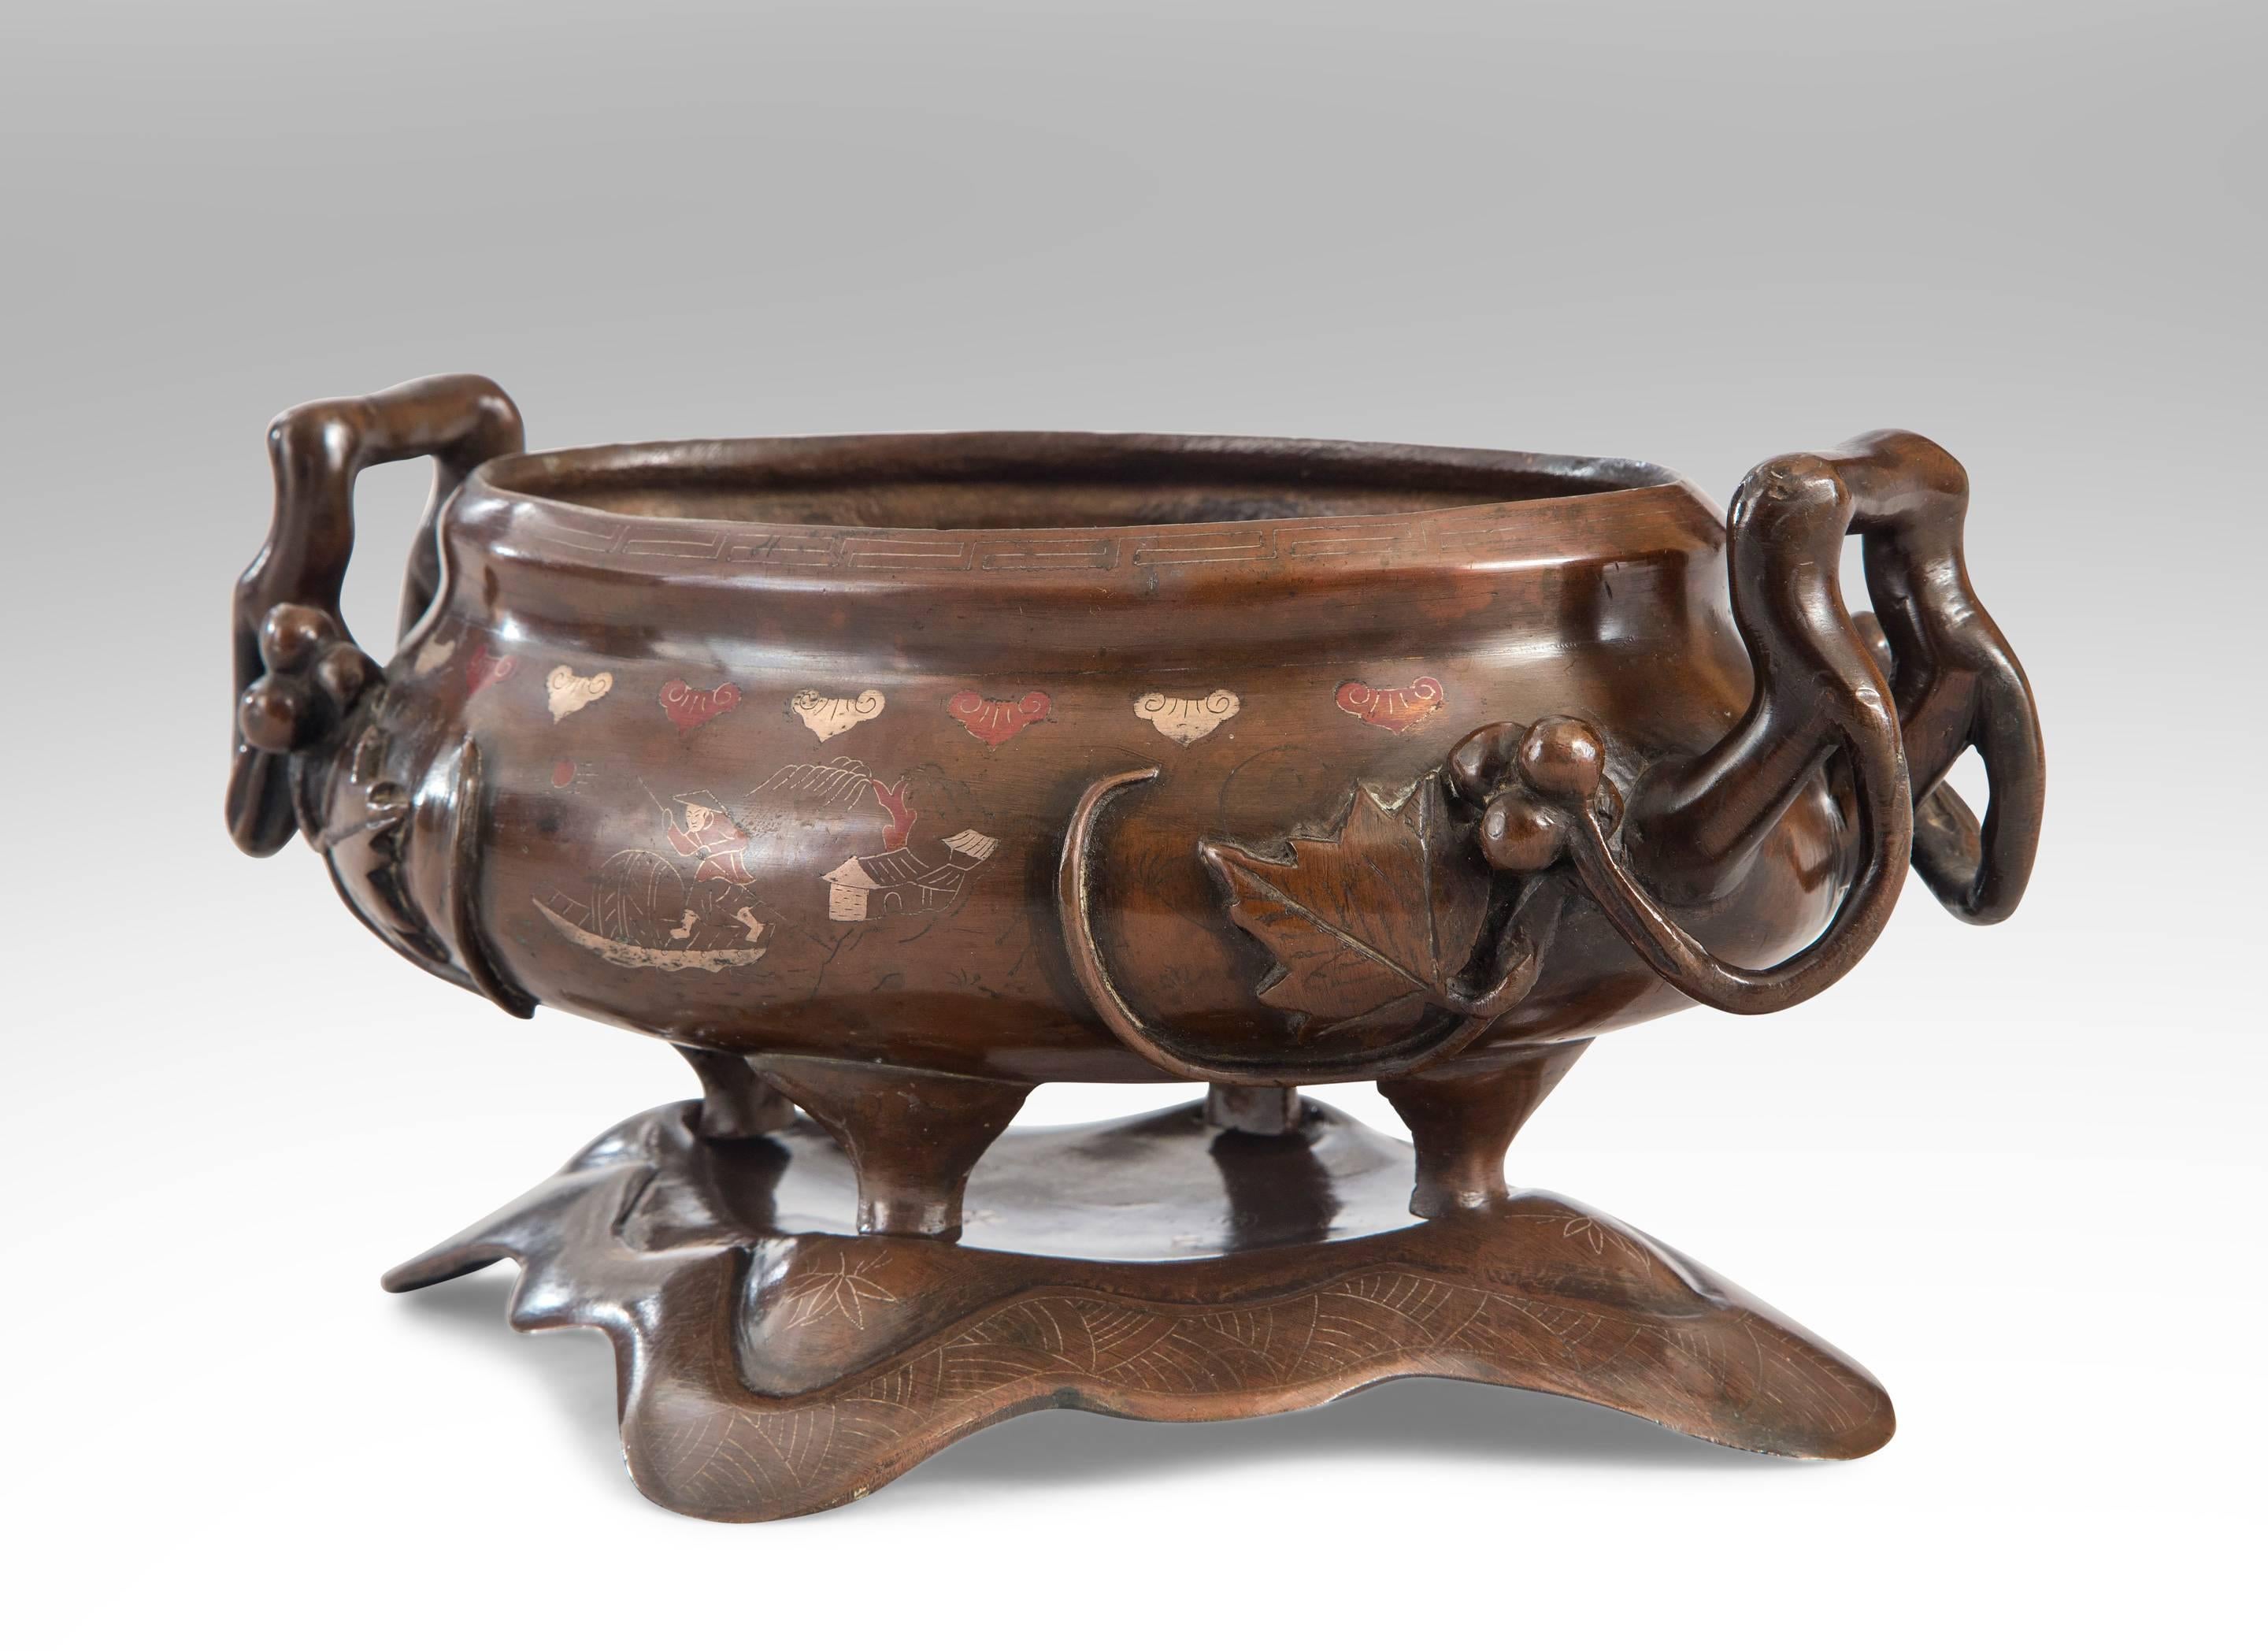 Of such fine quality even the unseen base is decorated with a inlaid trailing flowers. The oval bowl with an inlaid silver Greek key border and polychrome scenes of fishing and agriculture, the berry and foliate relief handles, on four legs set into